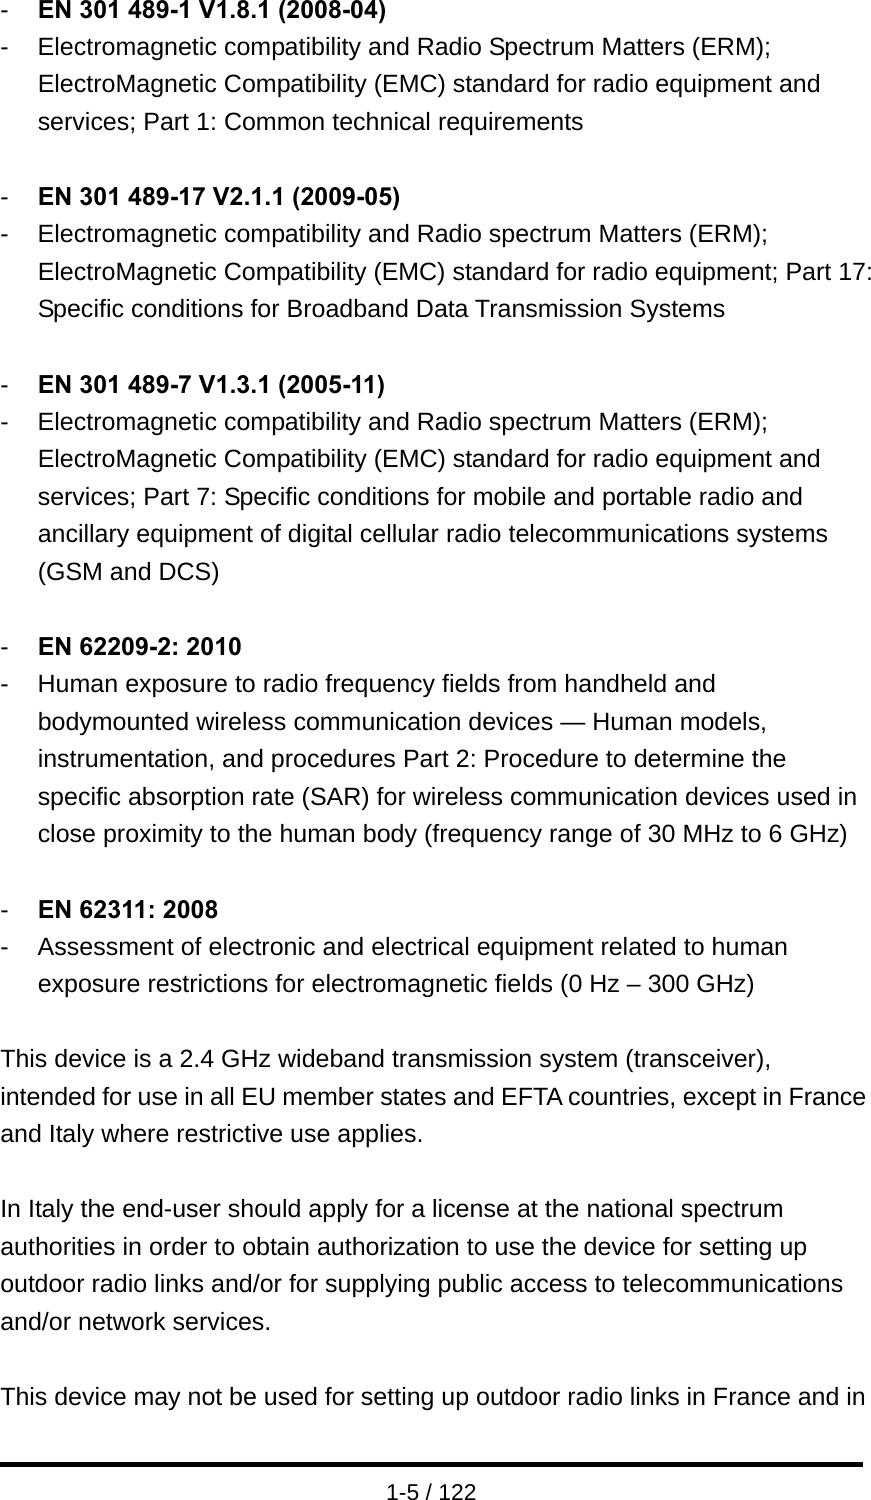  1-5 / 122 -  EN 301 489-1 V1.8.1 (2008-04) -  Electromagnetic compatibility and Radio Spectrum Matters (ERM); ElectroMagnetic Compatibility (EMC) standard for radio equipment and services; Part 1: Common technical requirements  -  EN 301 489-17 V2.1.1 (2009-05)   -  Electromagnetic compatibility and Radio spectrum Matters (ERM); ElectroMagnetic Compatibility (EMC) standard for radio equipment; Part 17: Specific conditions for Broadband Data Transmission Systems  -  EN 301 489-7 V1.3.1 (2005-11) -  Electromagnetic compatibility and Radio spectrum Matters (ERM); ElectroMagnetic Compatibility (EMC) standard for radio equipment and services; Part 7: Specific conditions for mobile and portable radio and ancillary equipment of digital cellular radio telecommunications systems (GSM and DCS)  -  EN 62209-2: 2010 -  Human exposure to radio frequency fields from handheld and bodymounted wireless communication devices — Human models, instrumentation, and procedures Part 2: Procedure to determine the specific absorption rate (SAR) for wireless communication devices used in close proximity to the human body (frequency range of 30 MHz to 6 GHz)  -  EN 62311: 2008 -  Assessment of electronic and electrical equipment related to human exposure restrictions for electromagnetic fields (0 Hz – 300 GHz)  This device is a 2.4 GHz wideband transmission system (transceiver), intended for use in all EU member states and EFTA countries, except in France and Italy where restrictive use applies.  In Italy the end-user should apply for a license at the national spectrum authorities in order to obtain authorization to use the device for setting up outdoor radio links and/or for supplying public access to telecommunications and/or network services.  This device may not be used for setting up outdoor radio links in France and in 